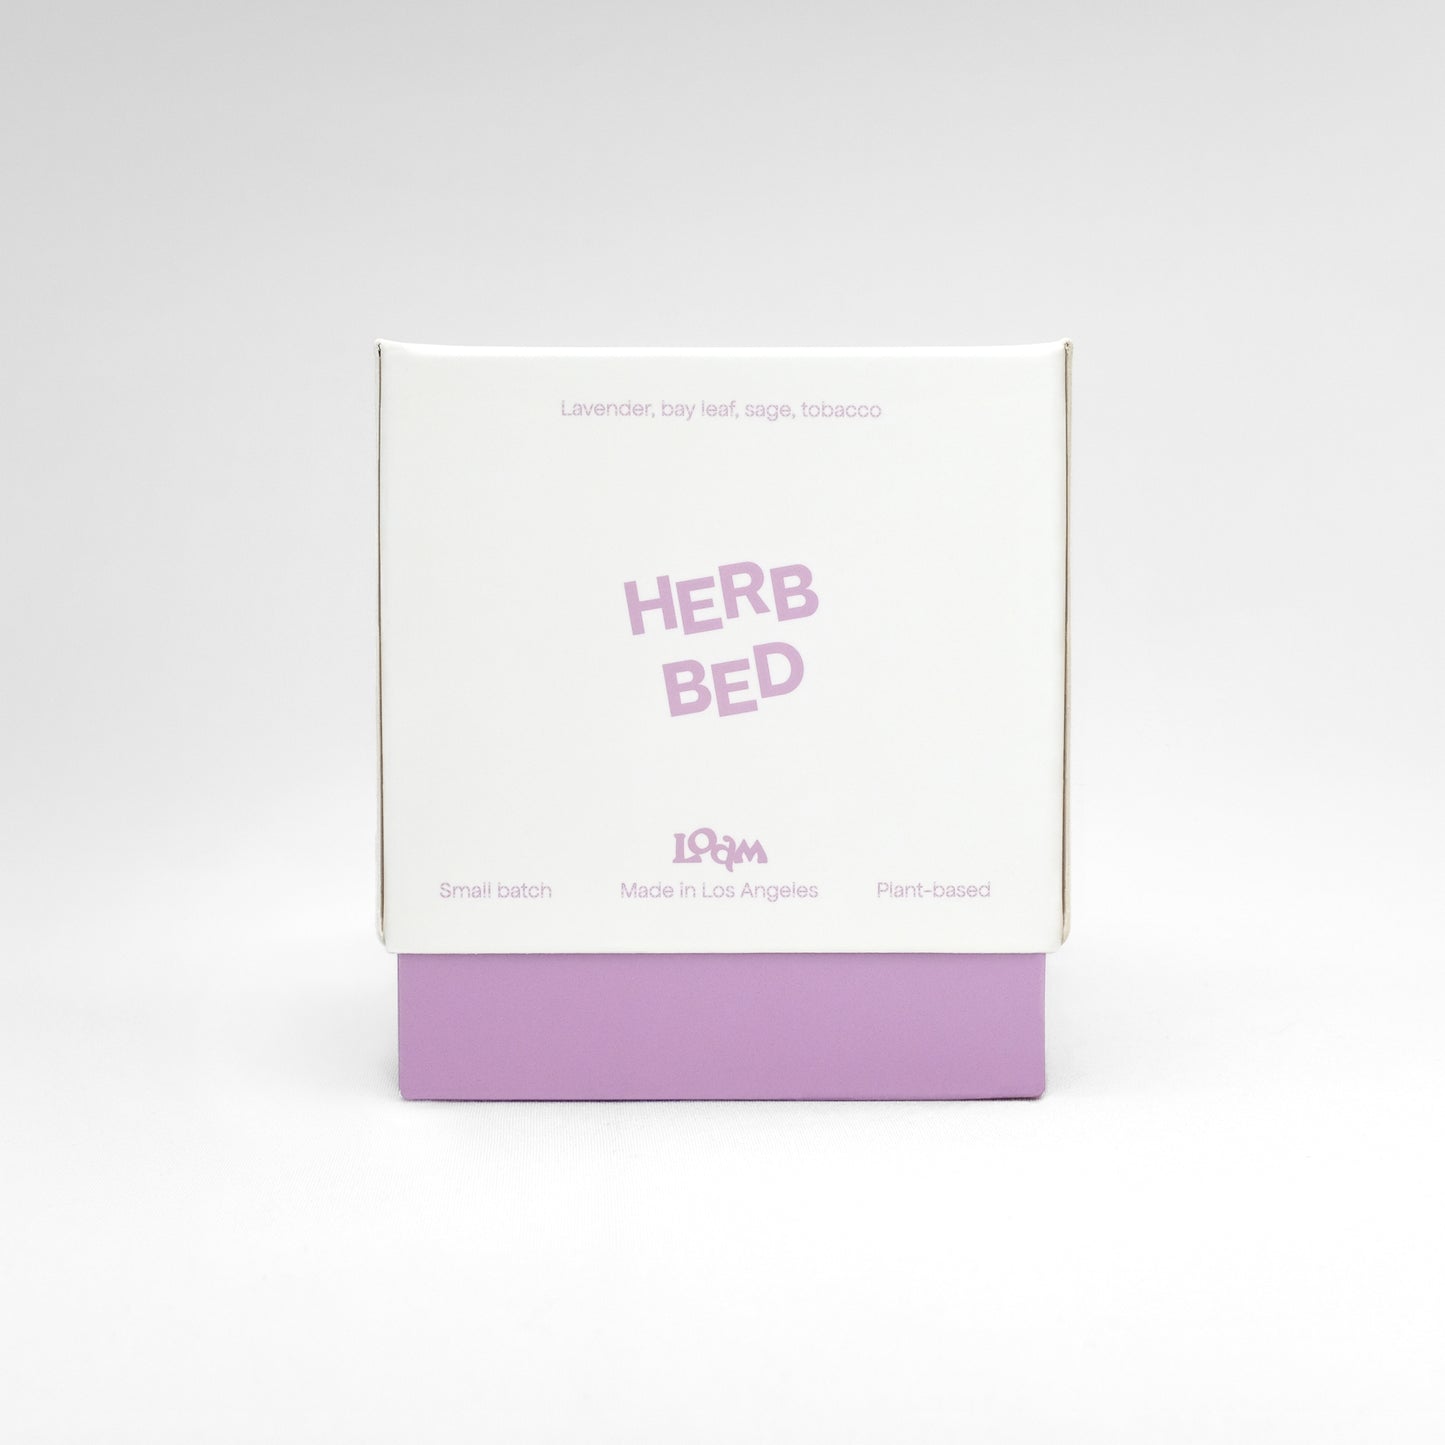 Herb Bed brings home the magical woody and herbaceous scent of homegrown, newly harvested herbs. Airy lavender, hazy tobacco, and dry and herbal sage come together to form a relaxing and contemplative scent. Every candle is crafted in small batches with coconut soy wax and 100% cotton wicks.